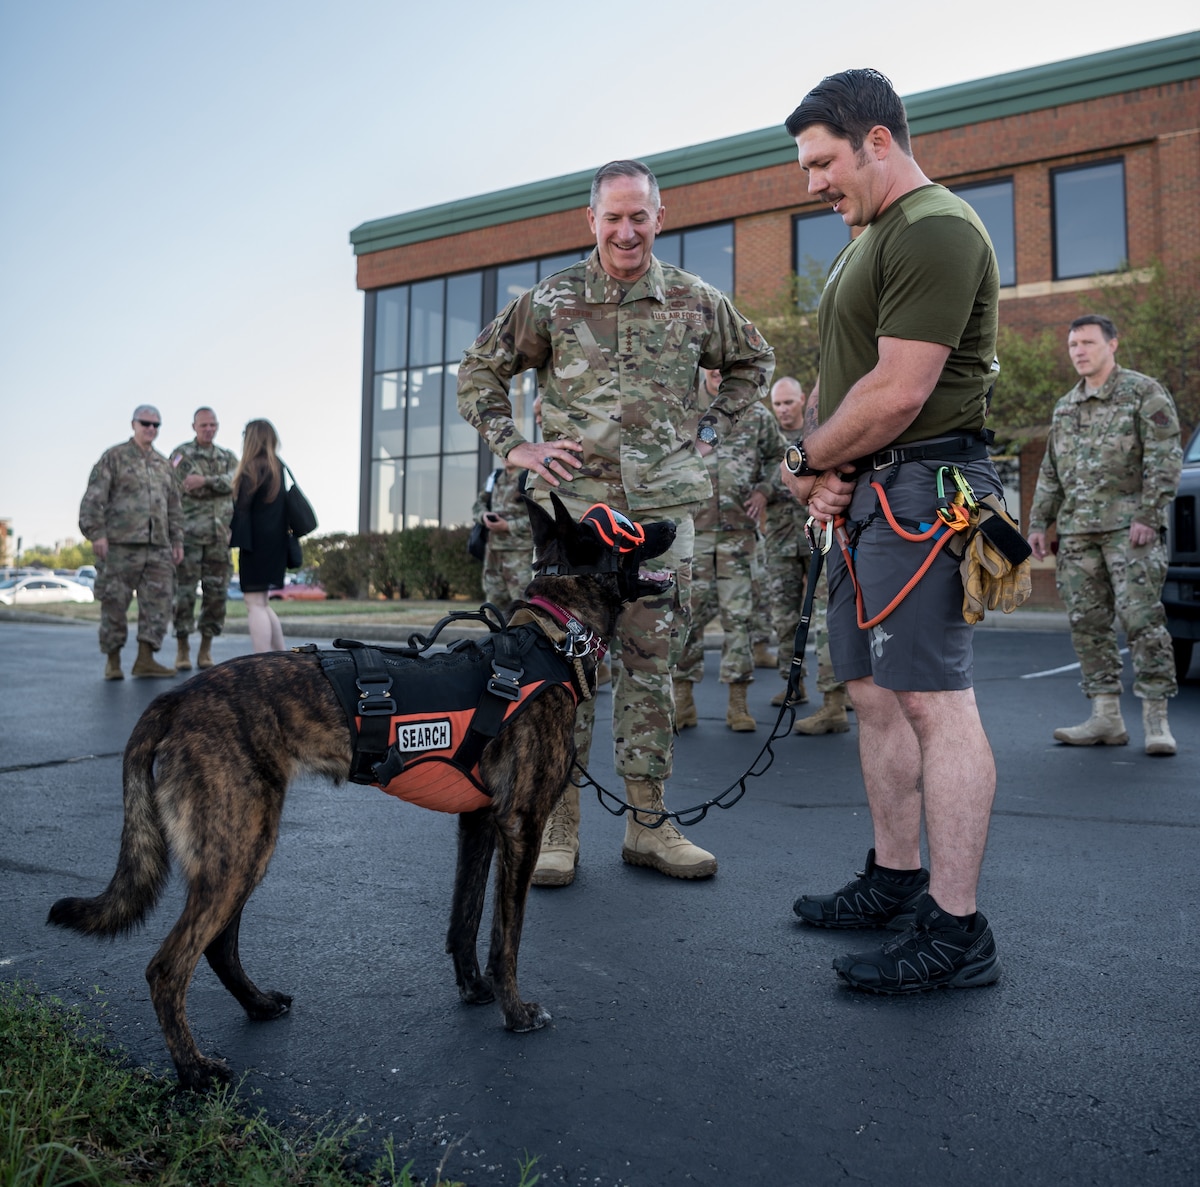 Air Force Chief of Staff Gen. David L. Goldfein (left) meets Callie, the only search-and-rescue dog in the Department of Defense, and her handler, Master Sgt. Rudy Parsons, a pararescueman in the 123rd Special Tactics Squadron, during a tour of the Kentucky Air National Guard Base in Louisville, Ky., Aug. 10, 2019. Goldfein toured various work centers, learning about the unique mission sets of the 123rd Airlift Wing. (U.S. Air National Guard photo by Staff Sgt. Joshua Horton)